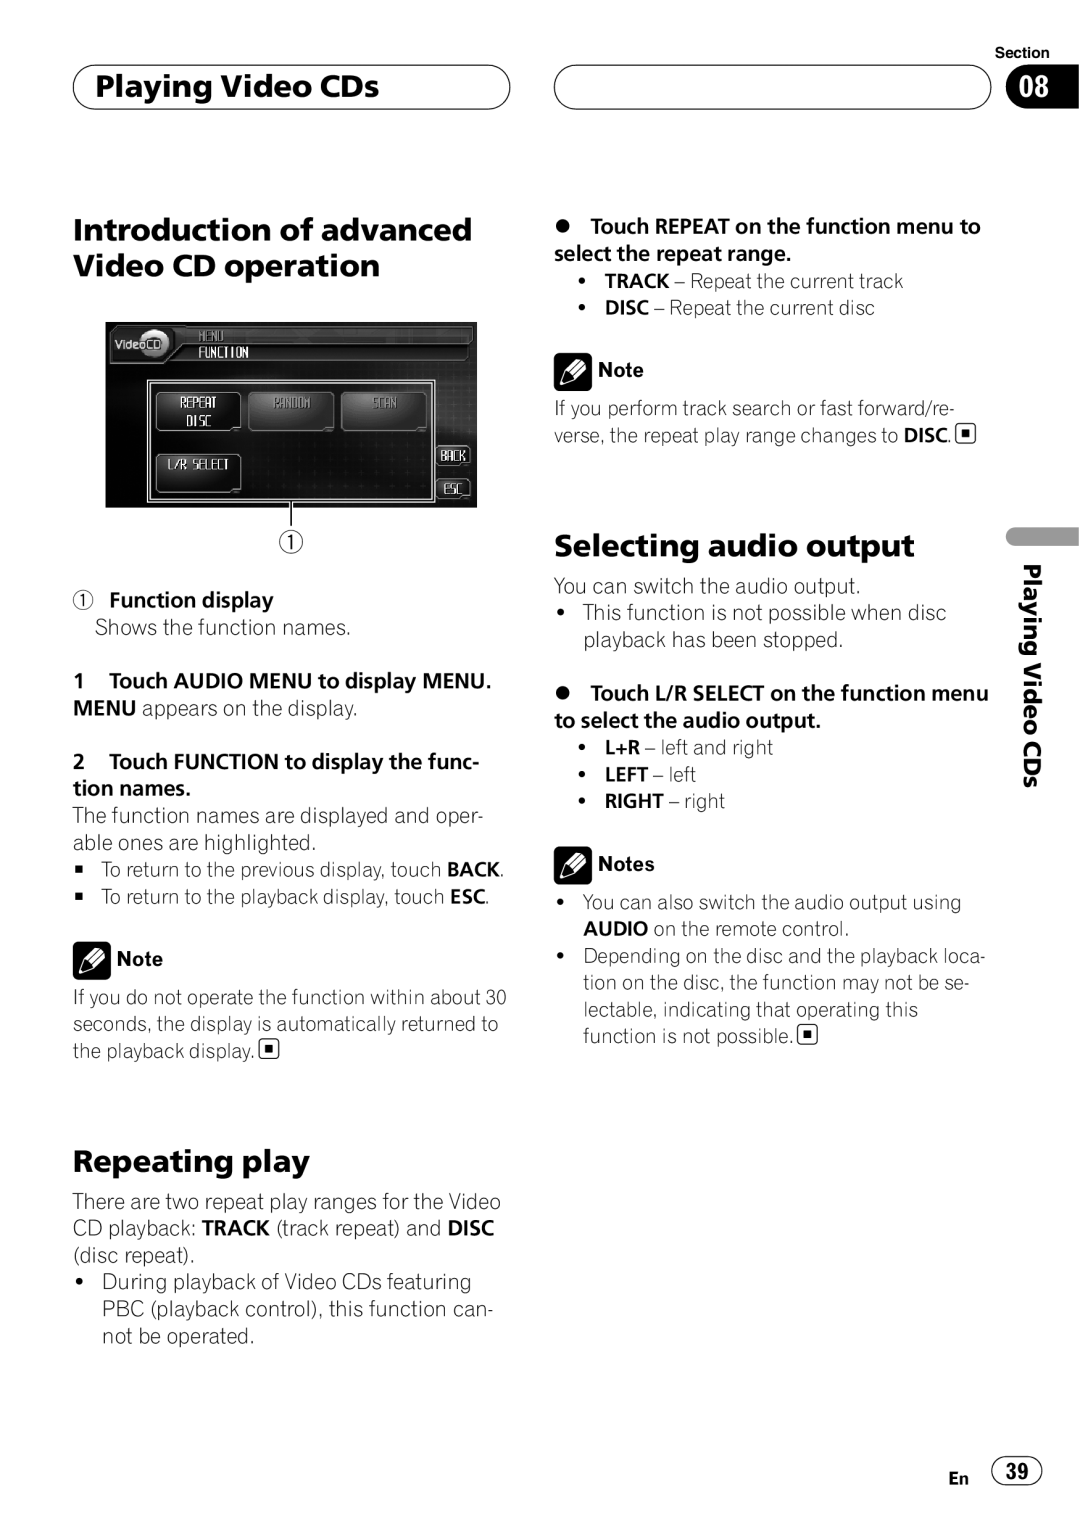 Pioneer AVH-P6000DVD operation manual Introduction of advanced Video CD operation, Playing Video CDs, Repeating play 